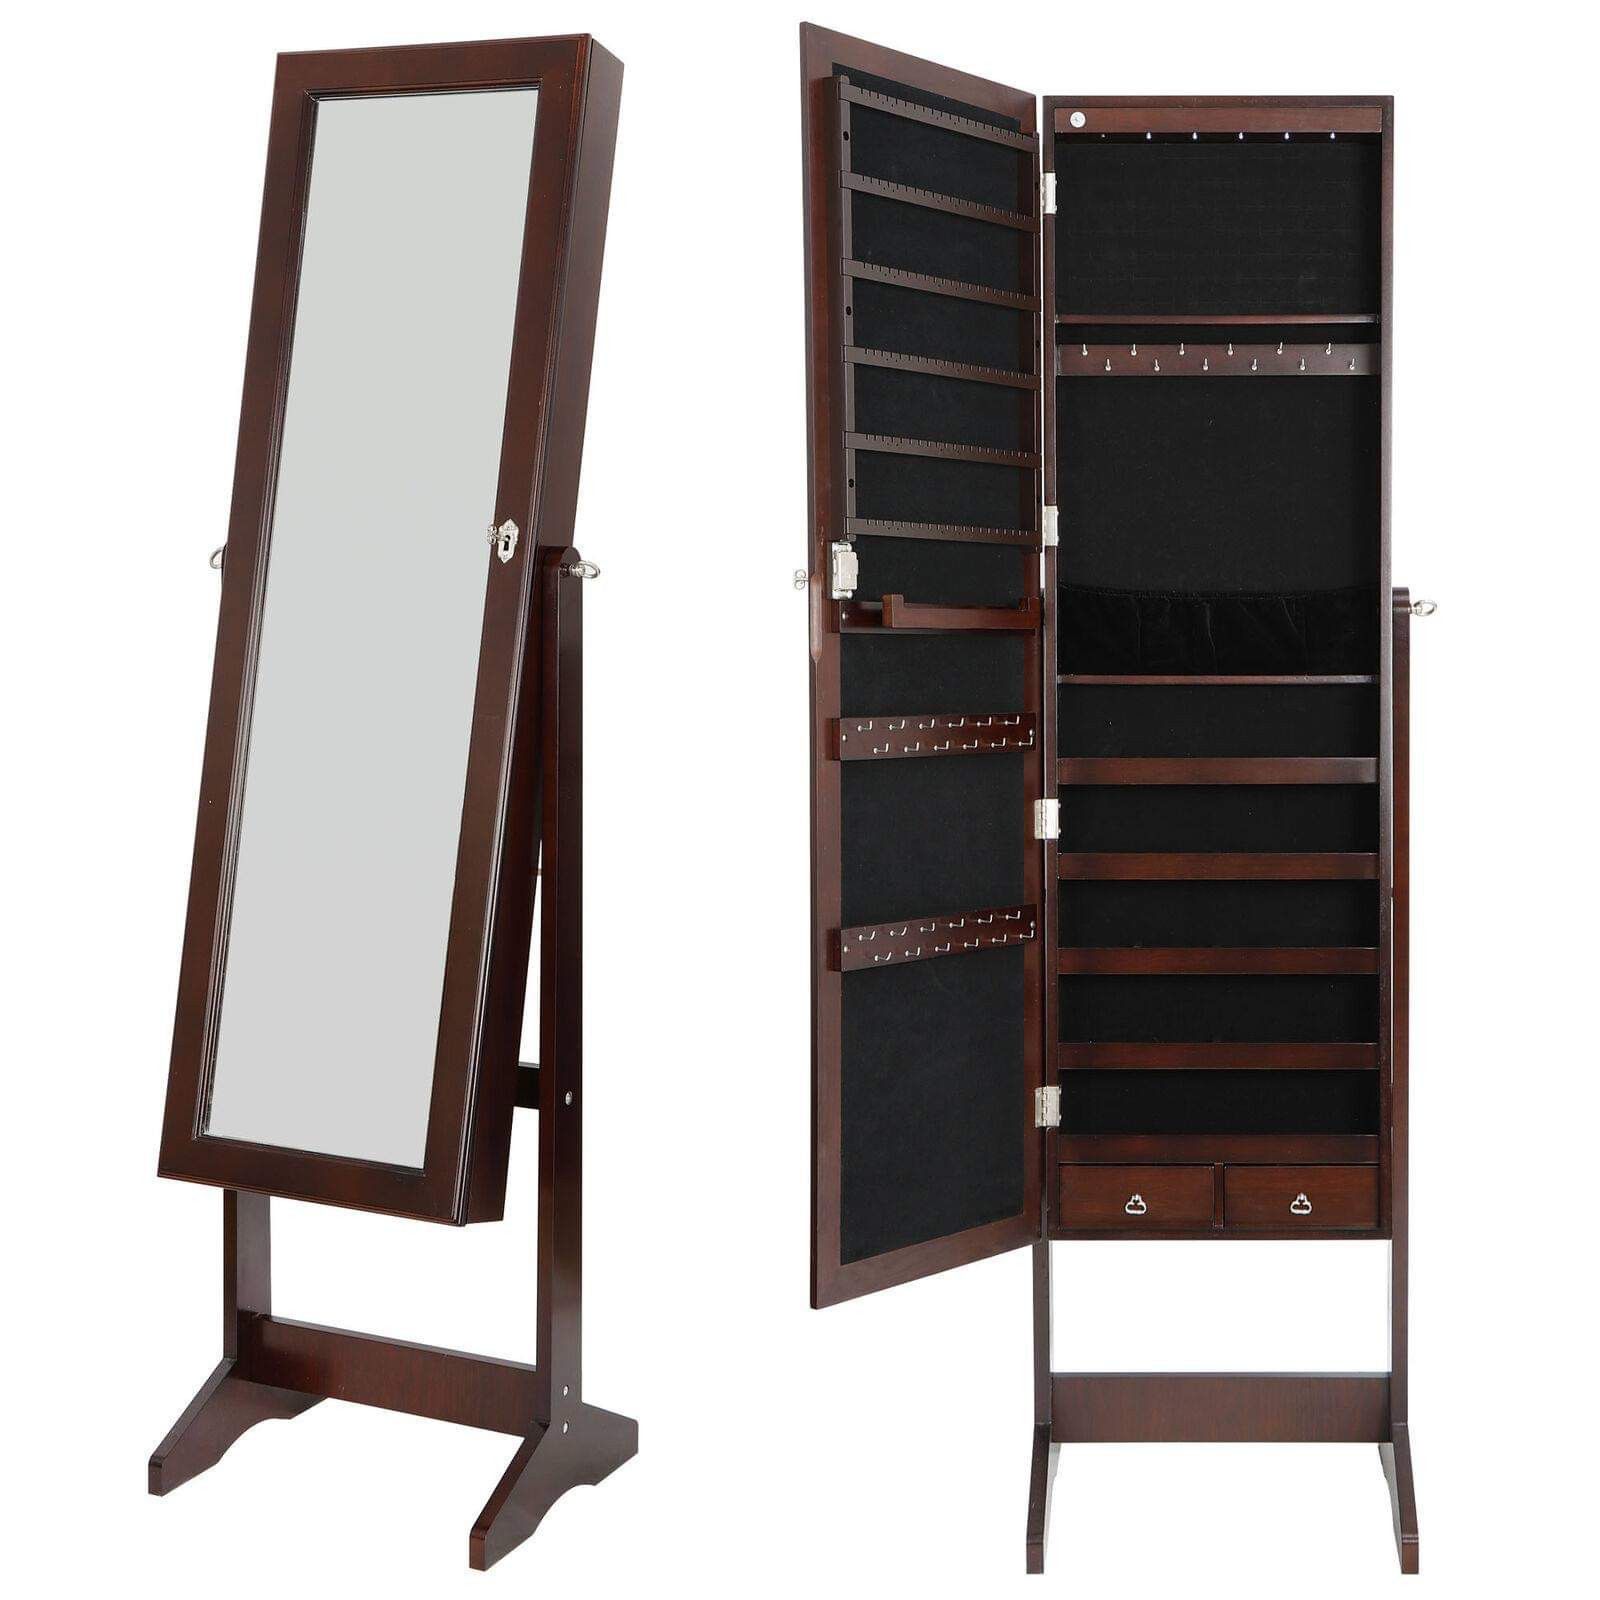 NEW 6 LEDs Mirror Jewelry Cabinet Armoire